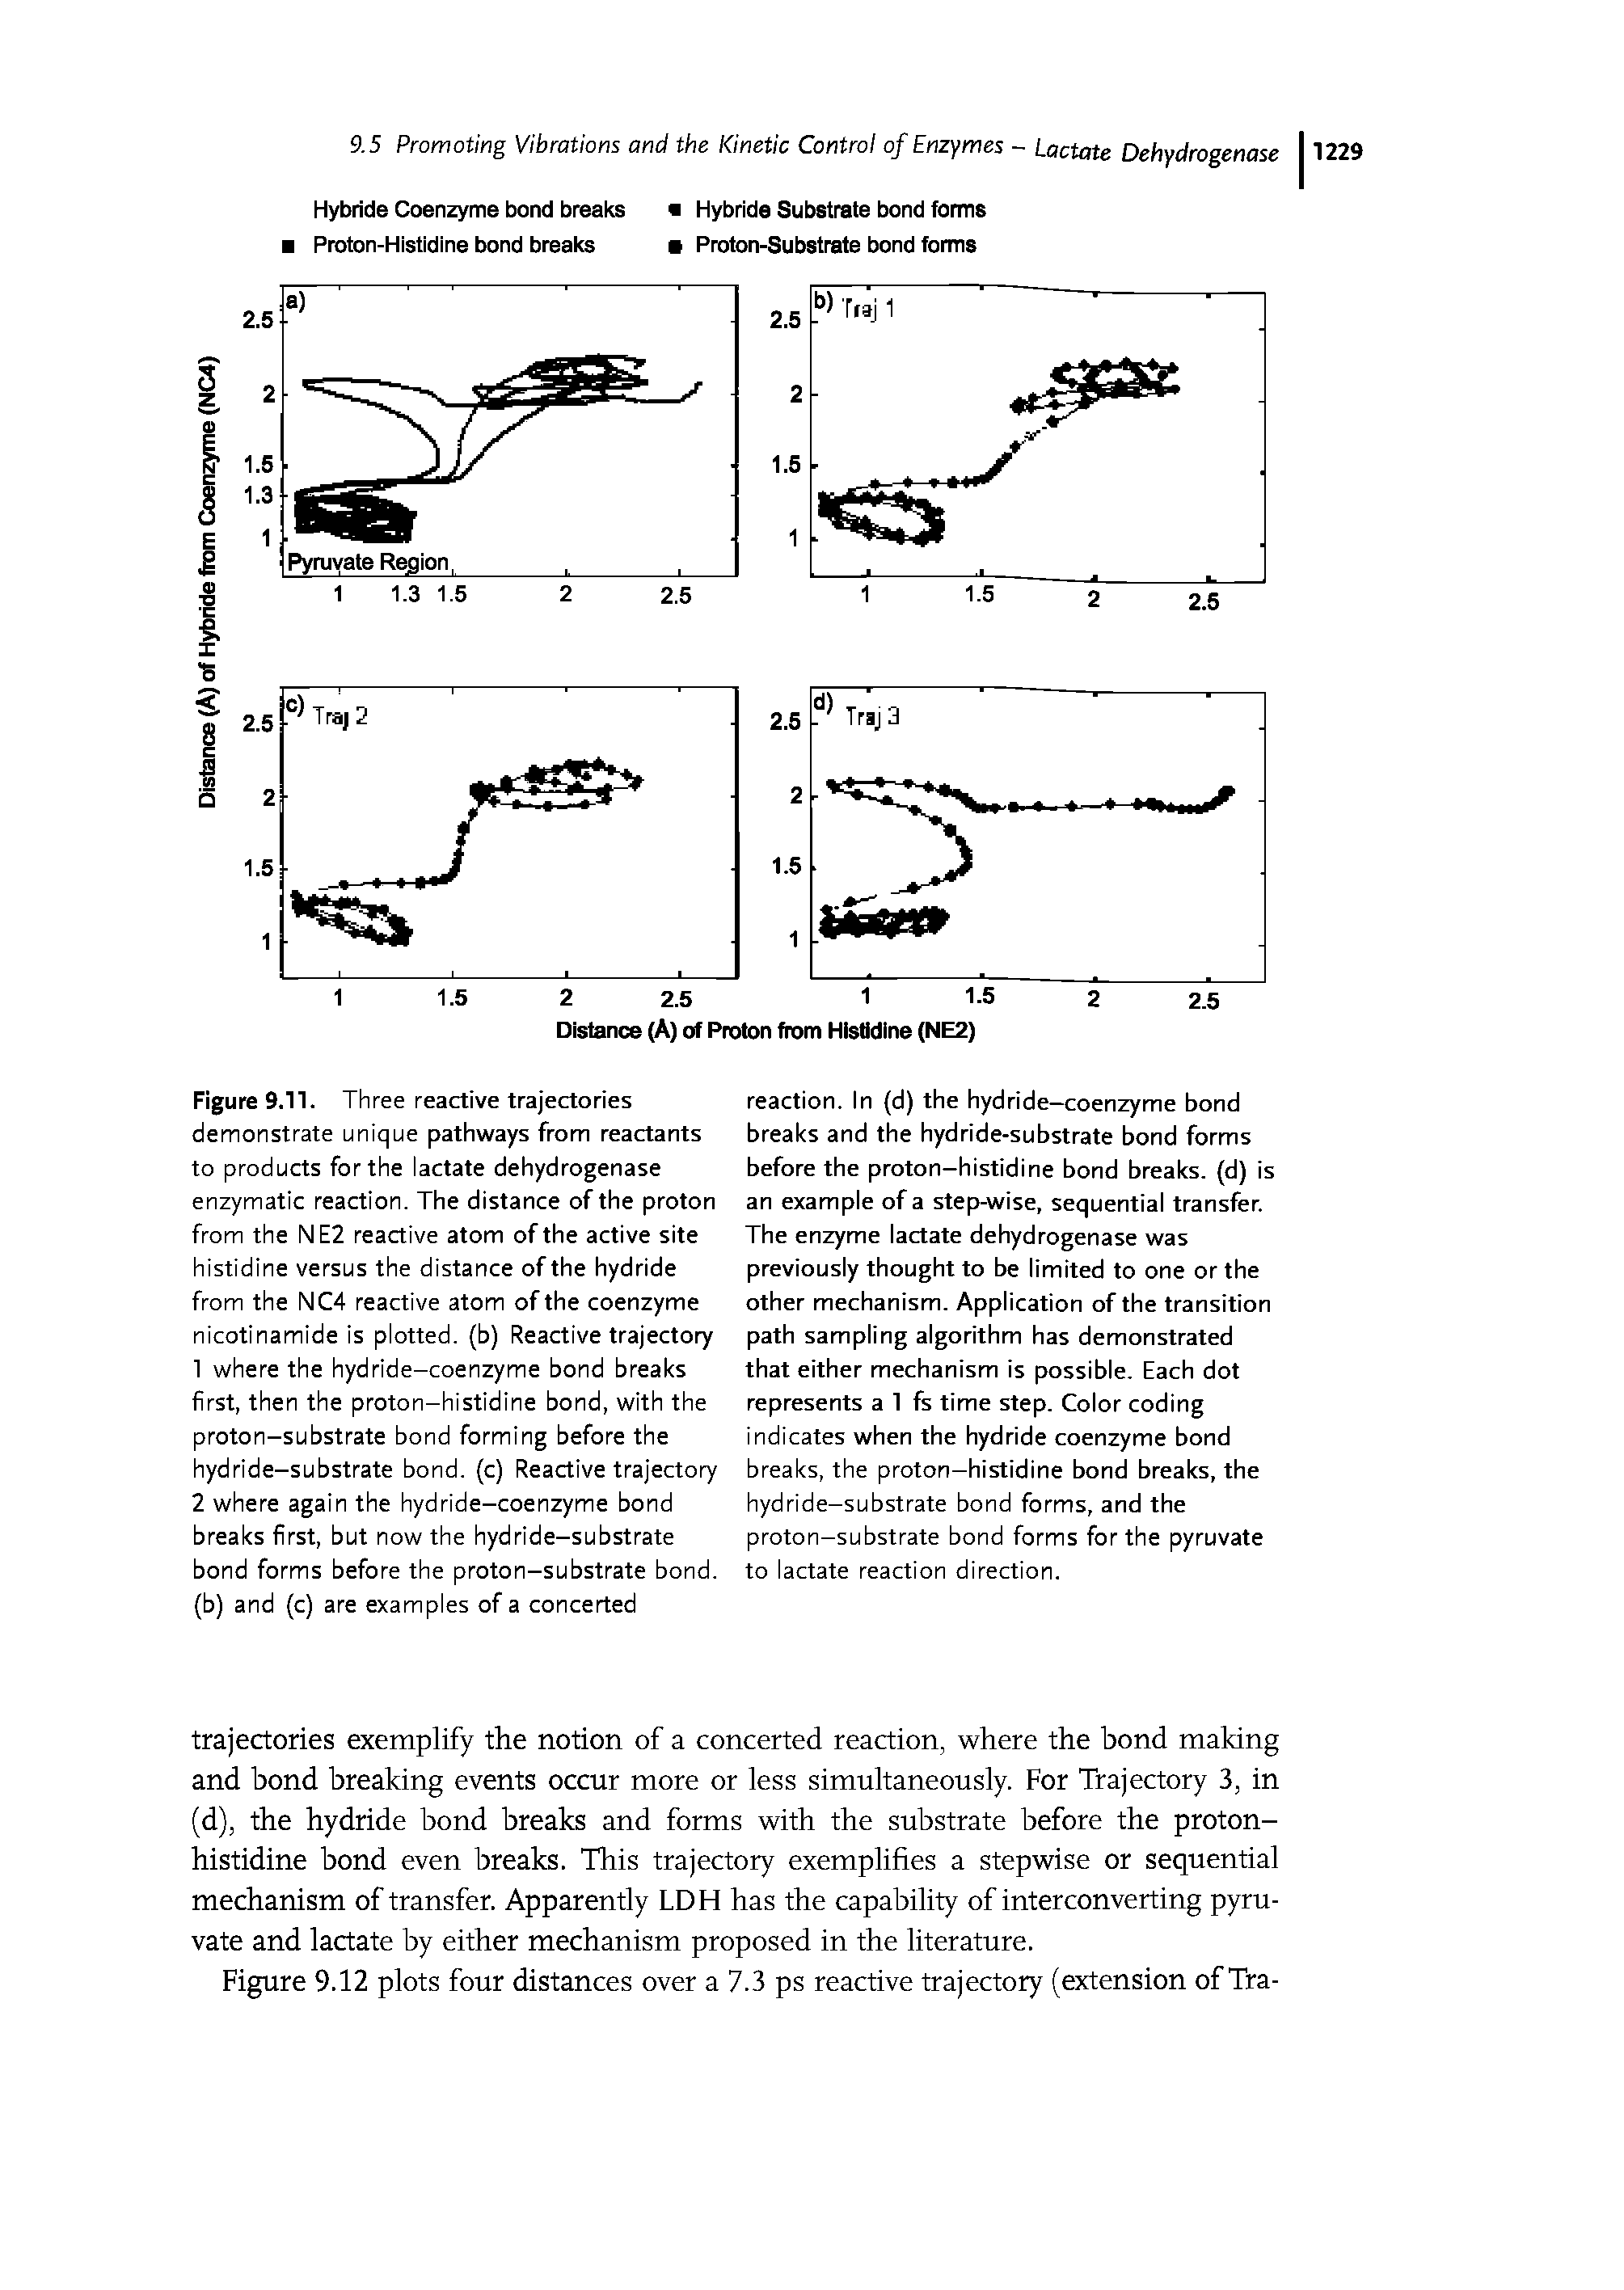 Figure 9.11. Three reactive trajectories demonstrate unique pathways from reactants to products for the lactate dehydrogenase enzymatic reaction. The distance of the proton from the NE2 reactive atom of the active site histidine versus the distance of the hydride from the NC4 reactive atom of the coenzyme nicotinamide is plotted, (b) Reactive trajectory...